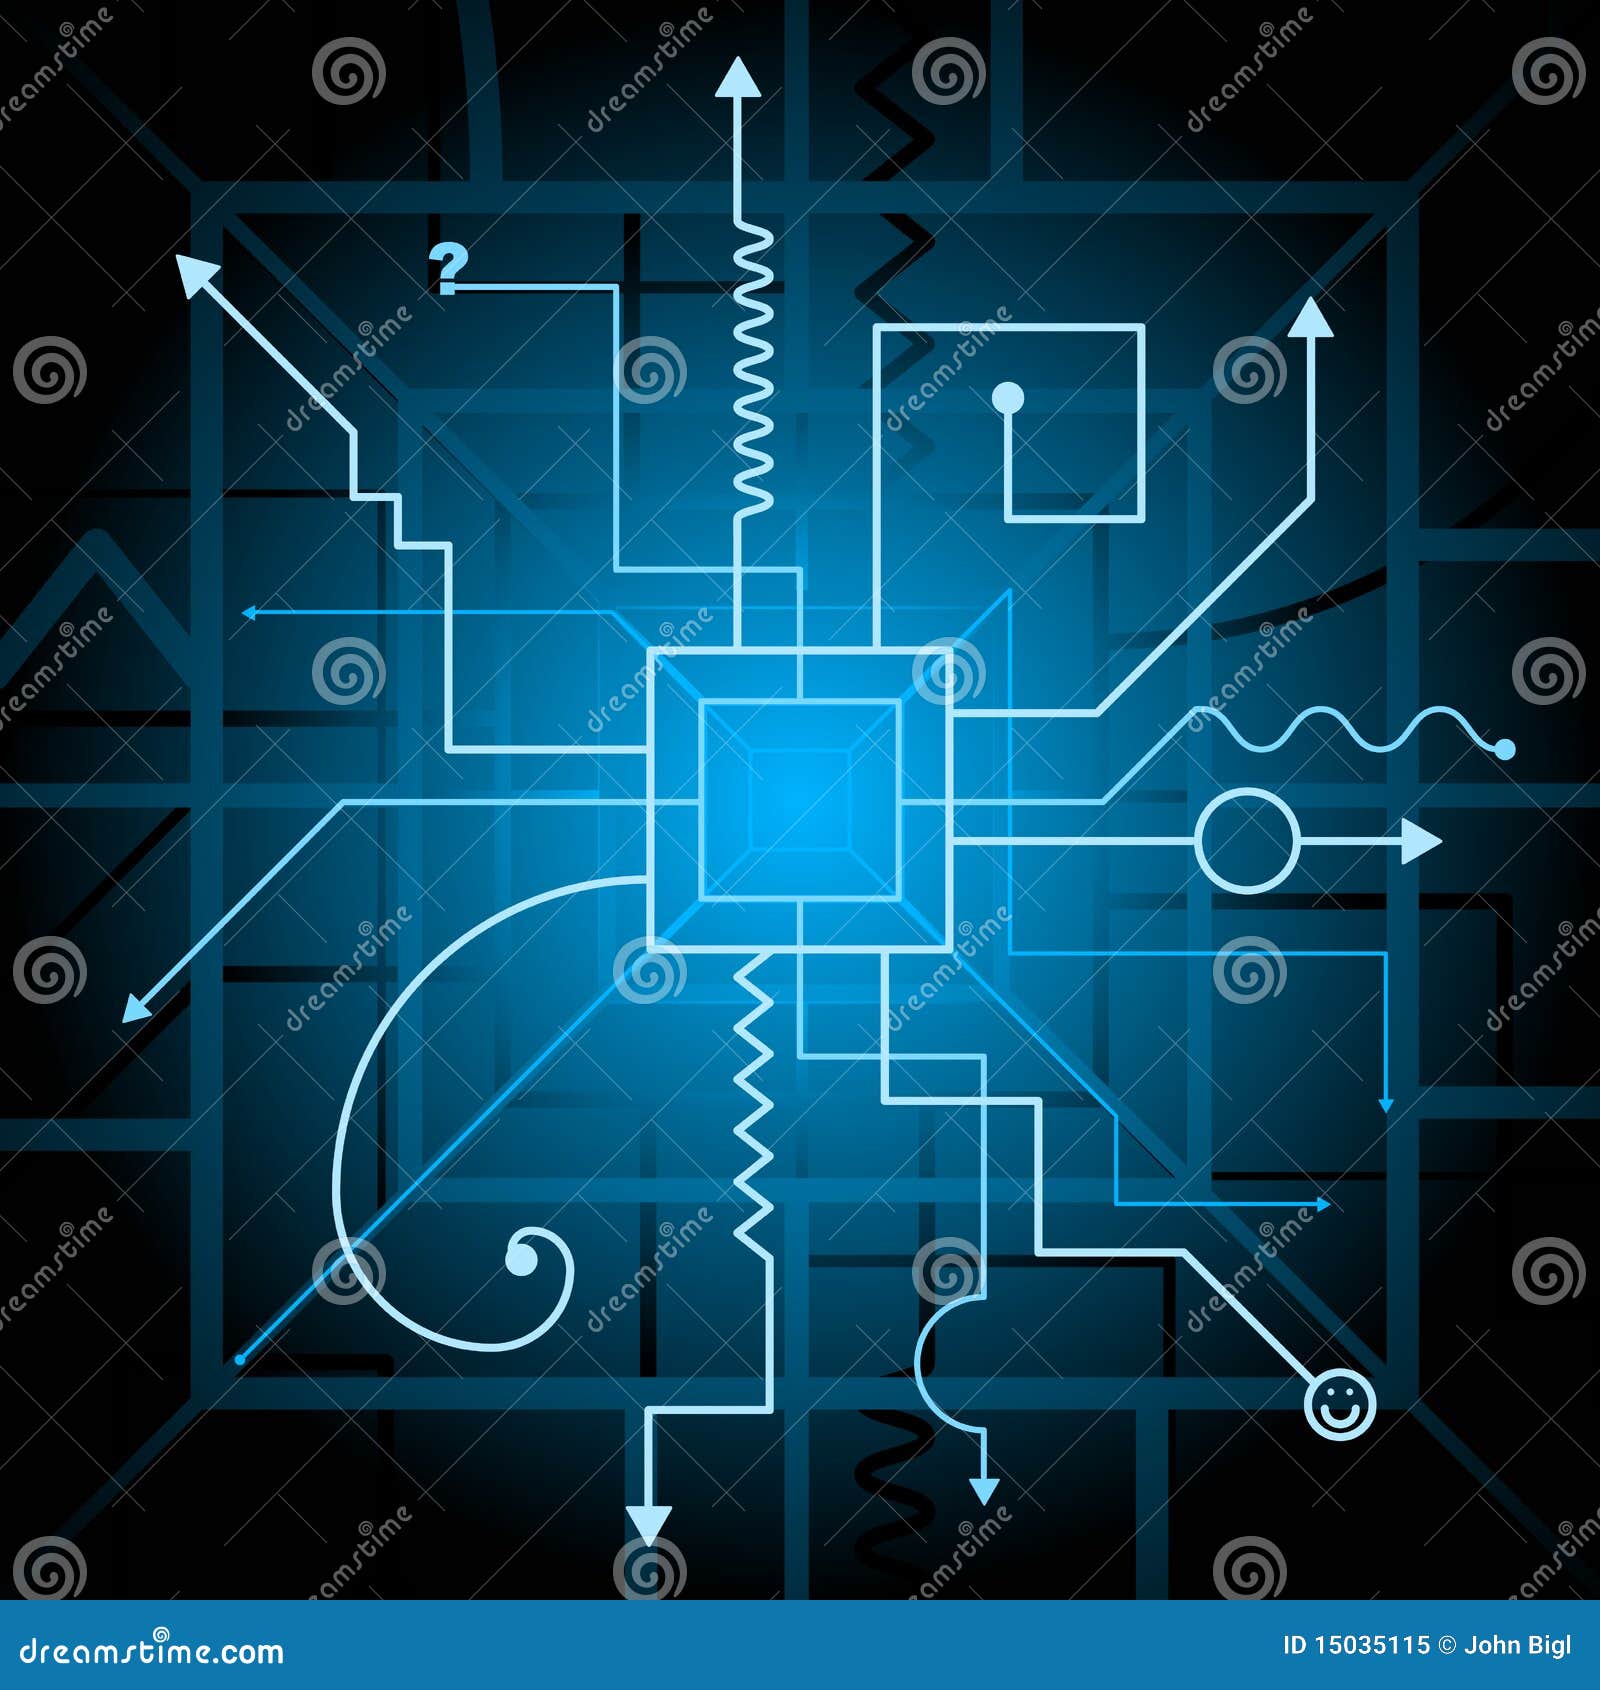 Contraption schematic stock vector. Illustration of spiral - 15035115